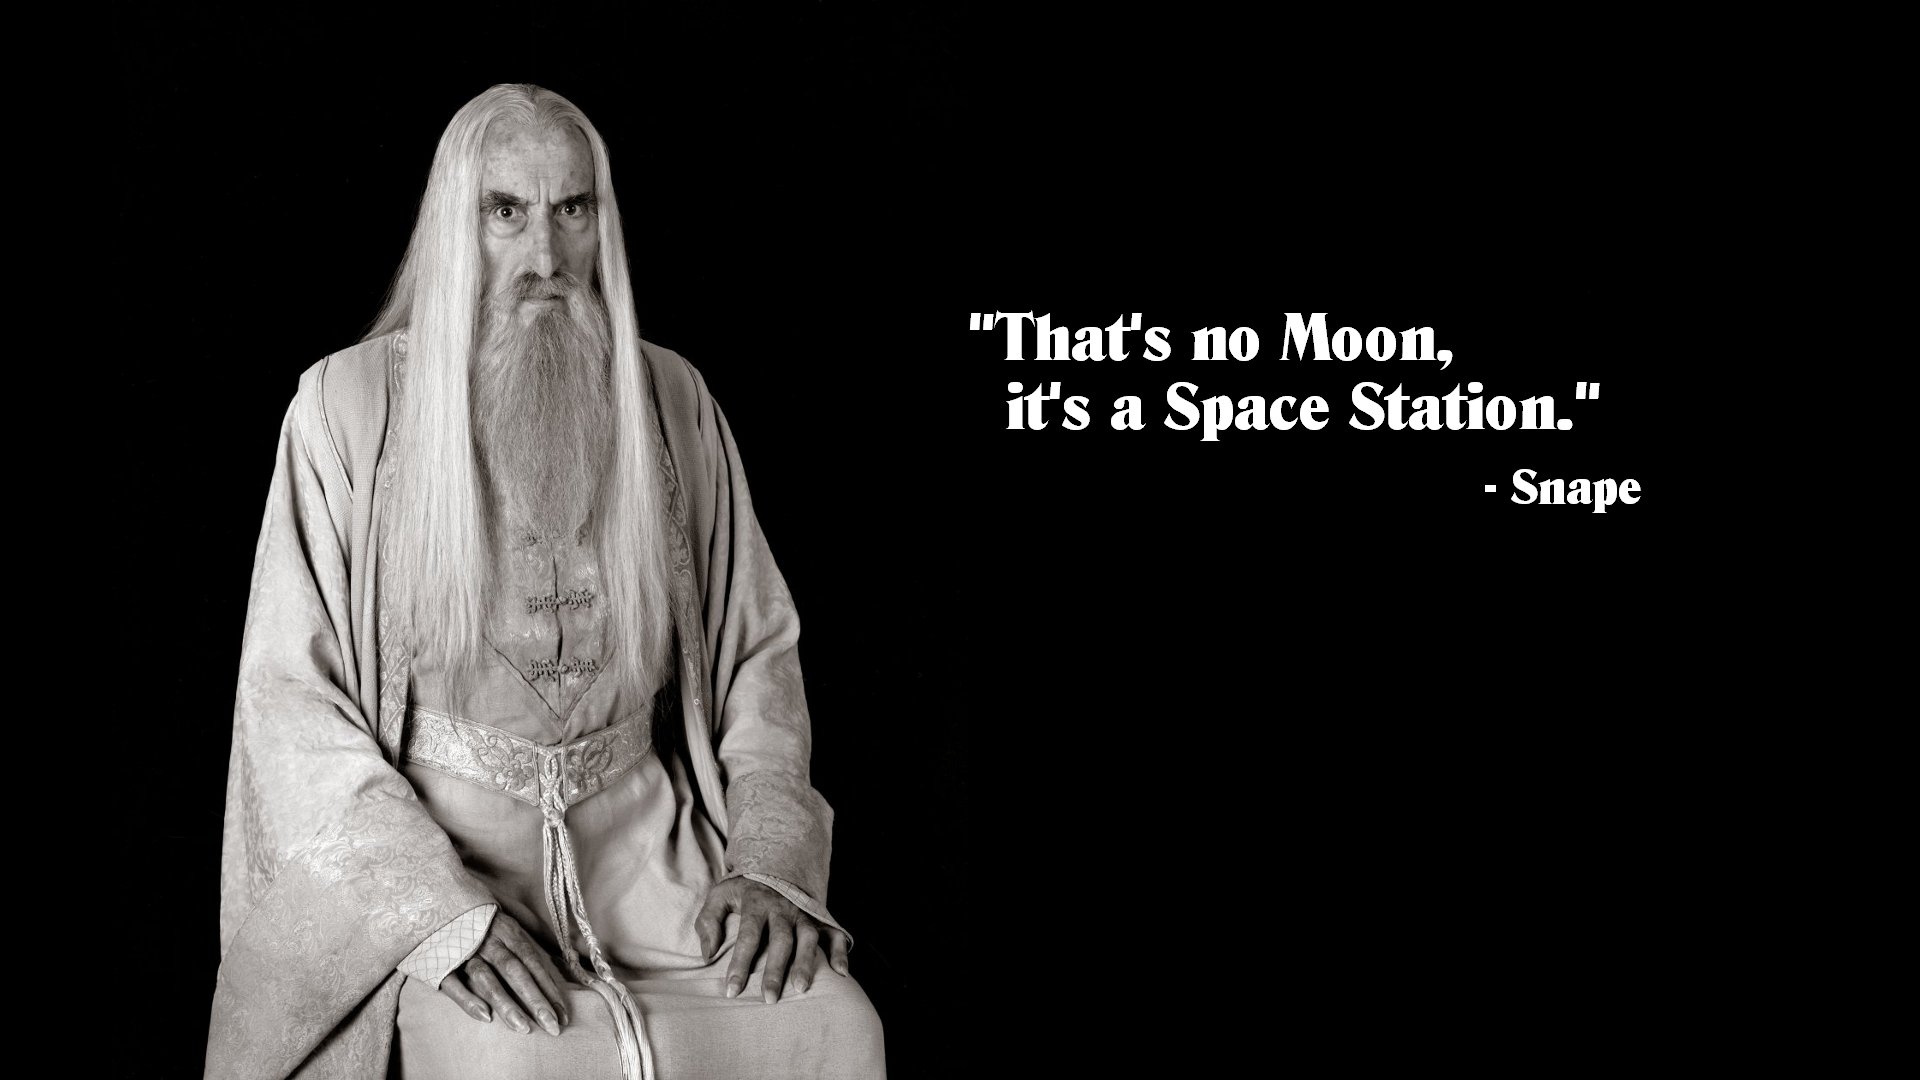 movies humor quotes the lord of the rings harry potter saruman 1920x1080 wallpaper